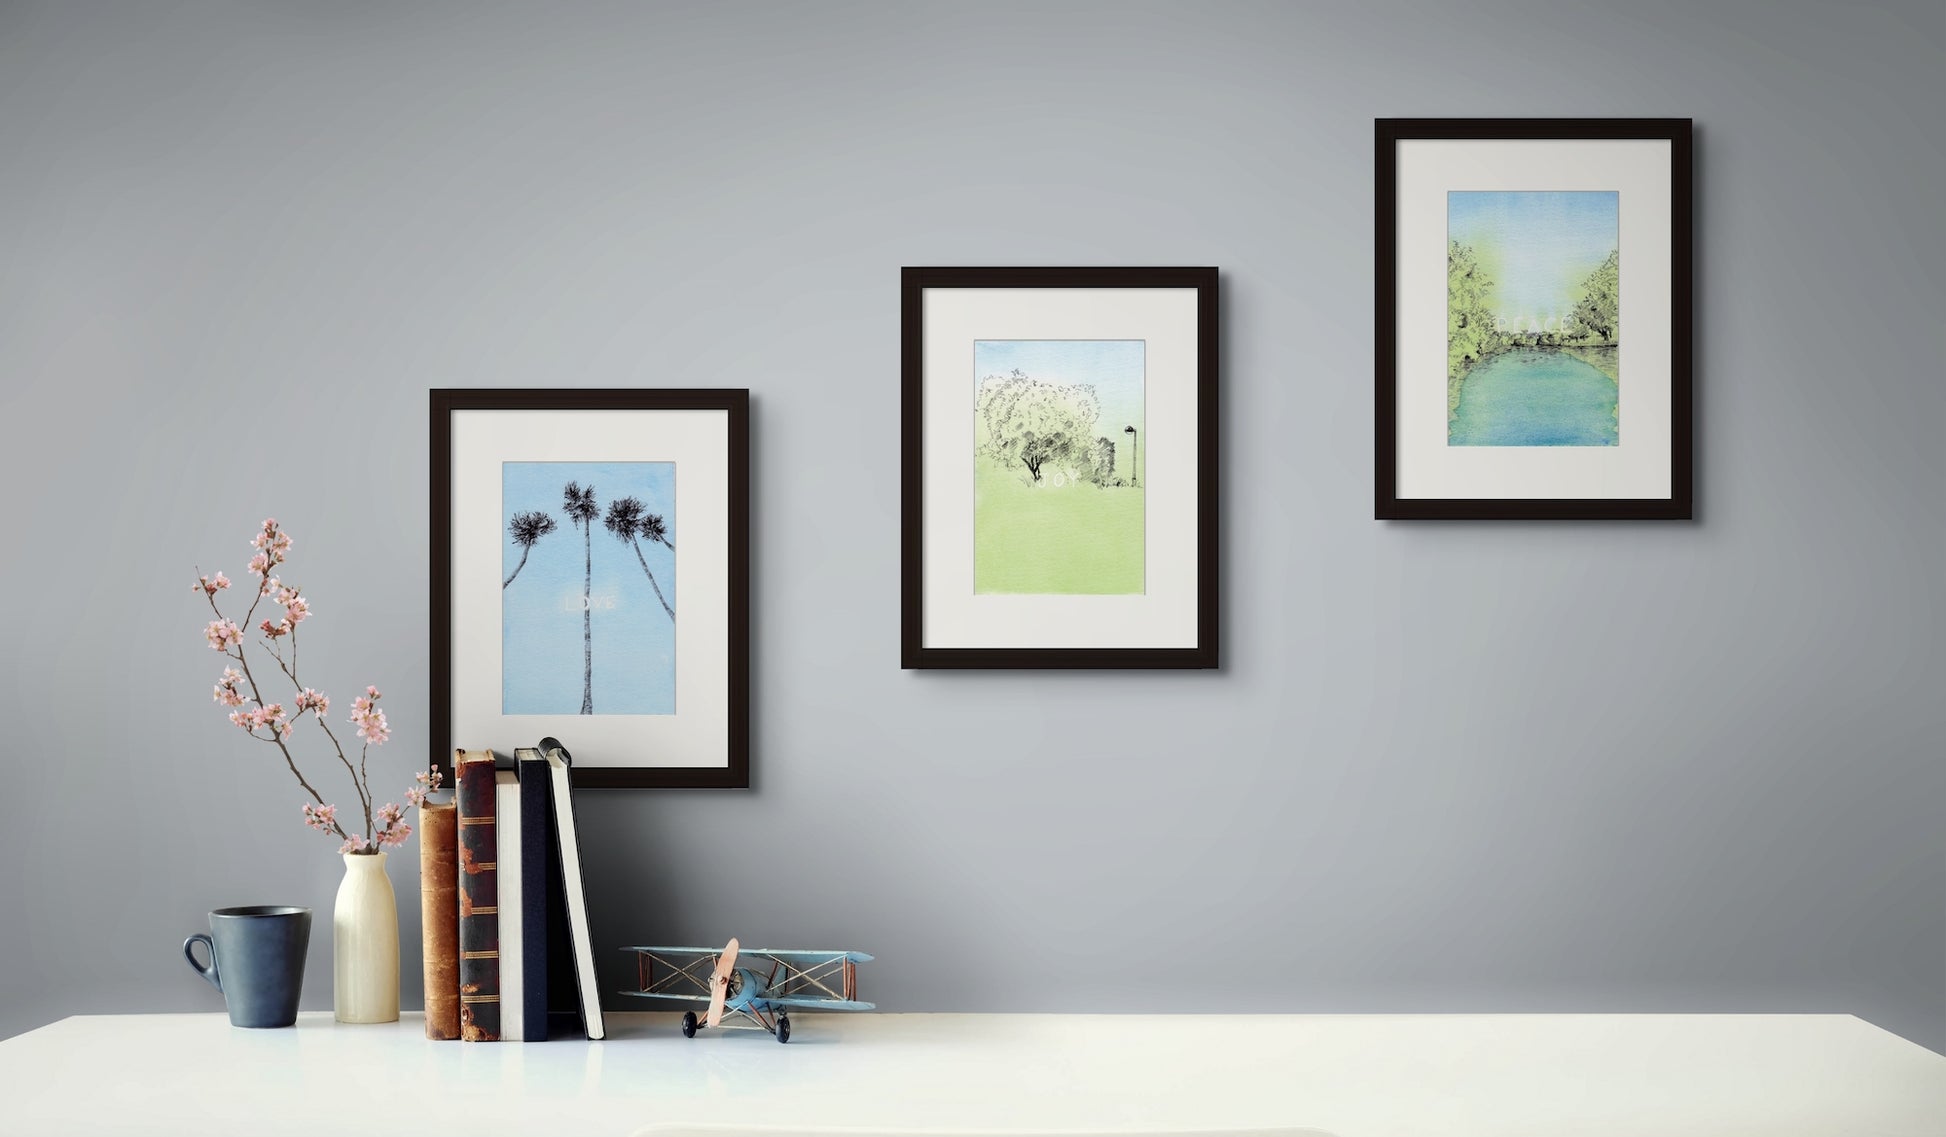 Image: set a three framed line drawing art prints of love, joy, peace in a home office